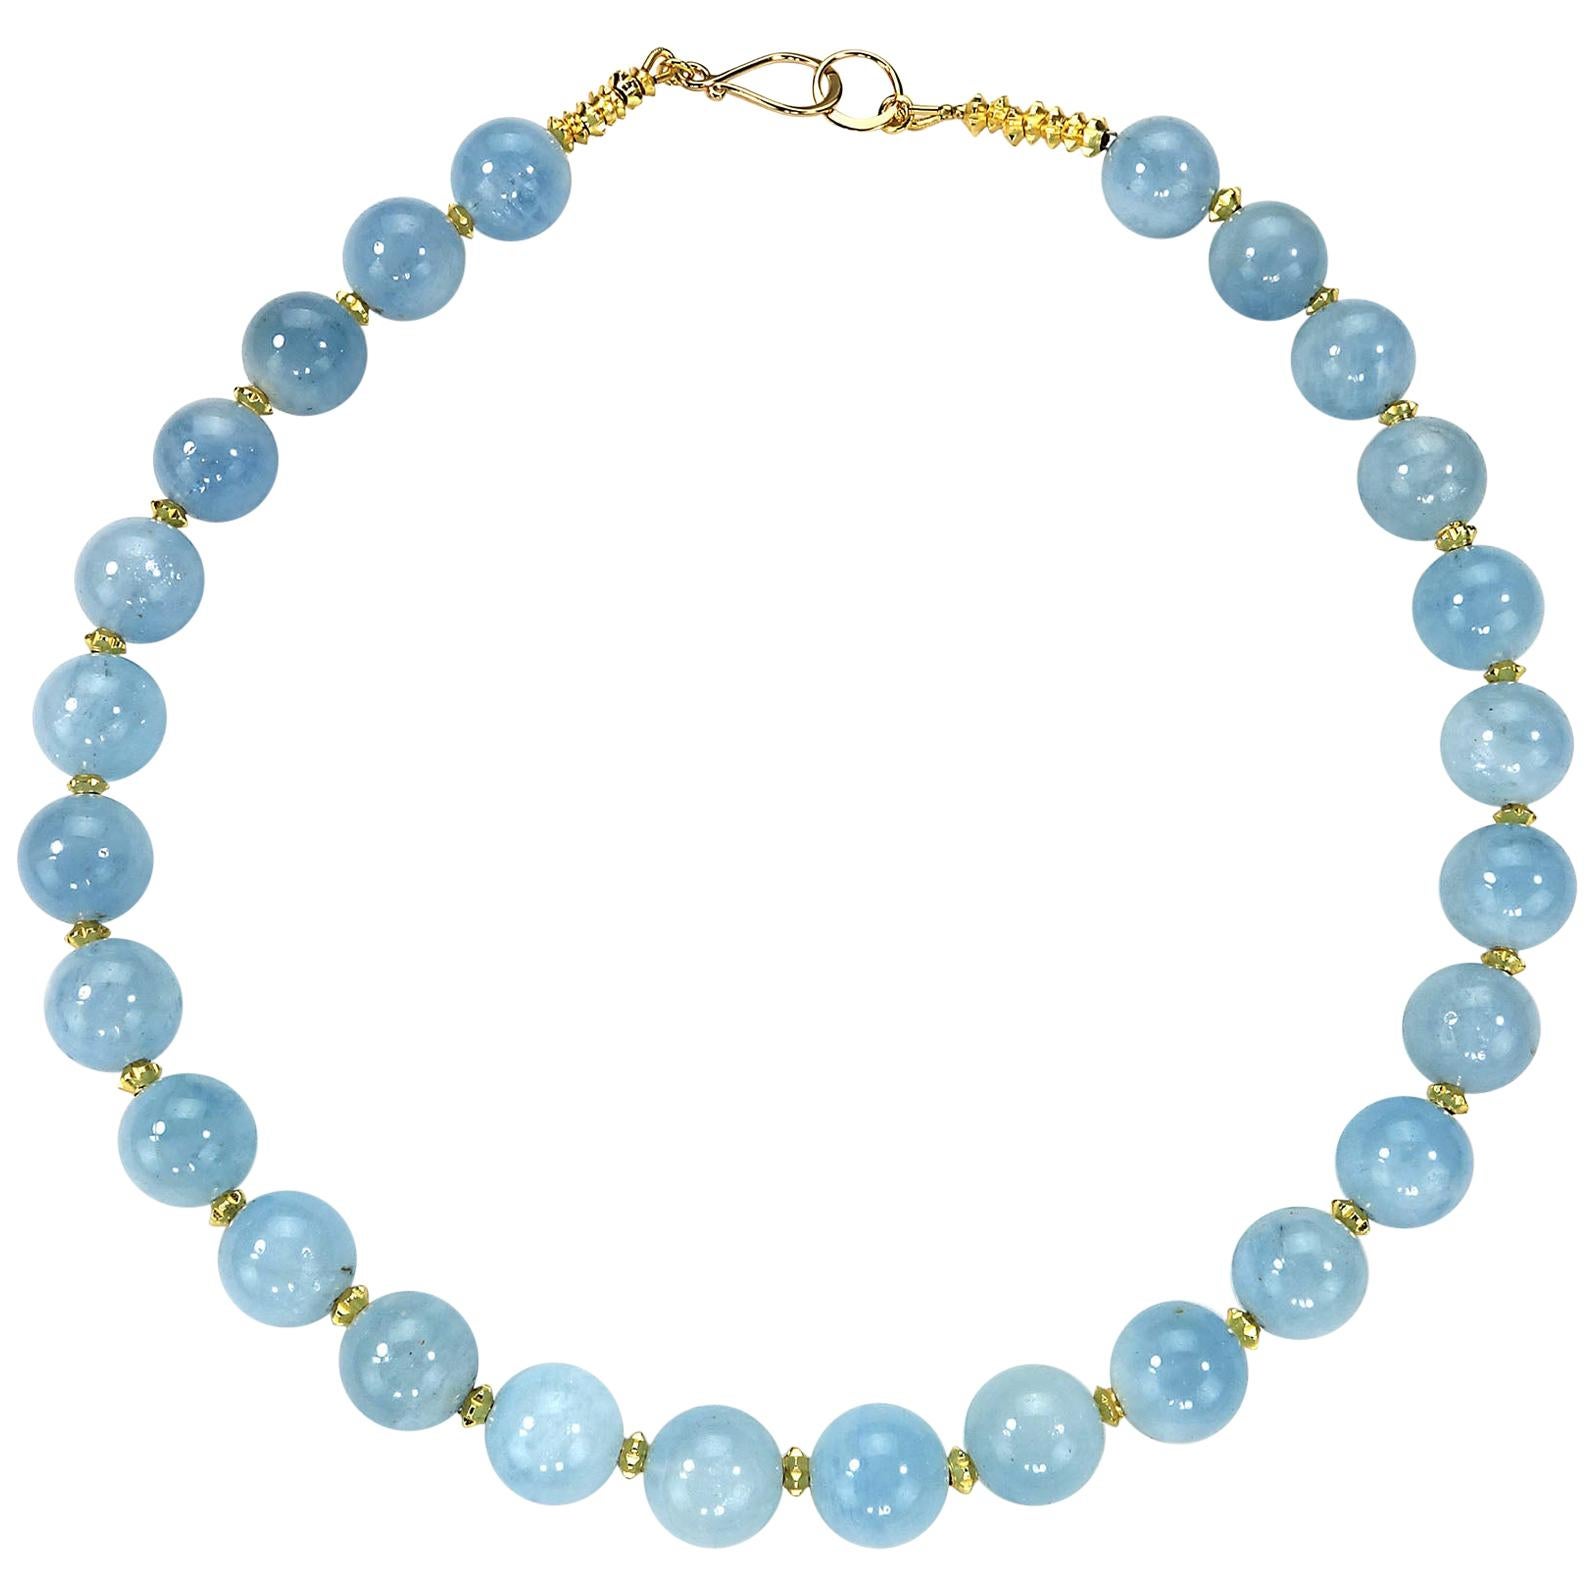 Gemjunky Translucent Aquamarine Choker Necklace with Gold Accents